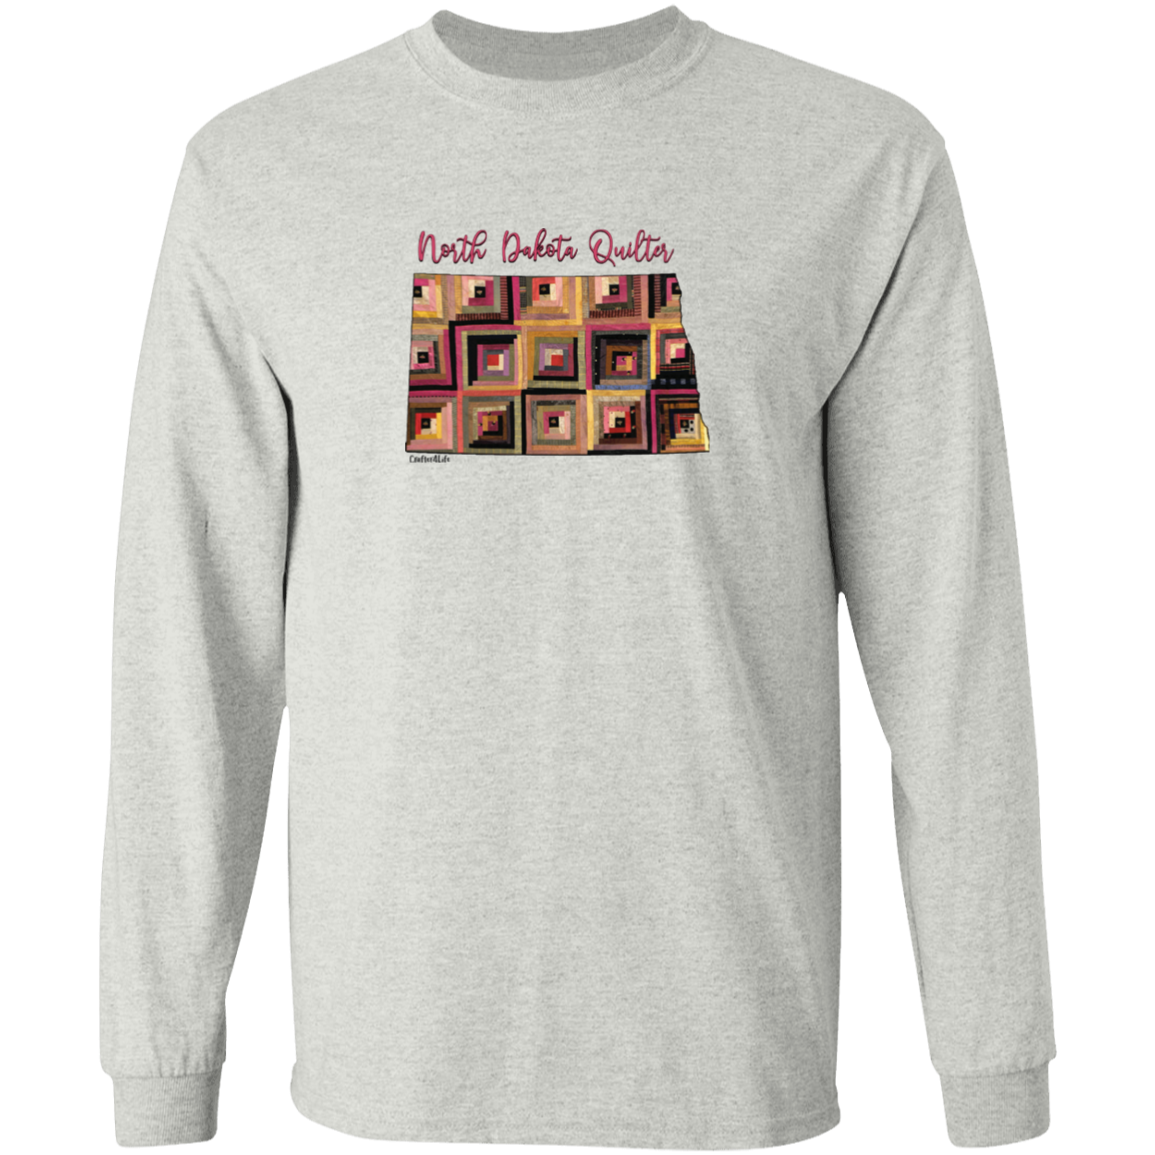 North Dakota Quilter Long Sleeve T-Shirt, Gift for Quilting Friends and Family